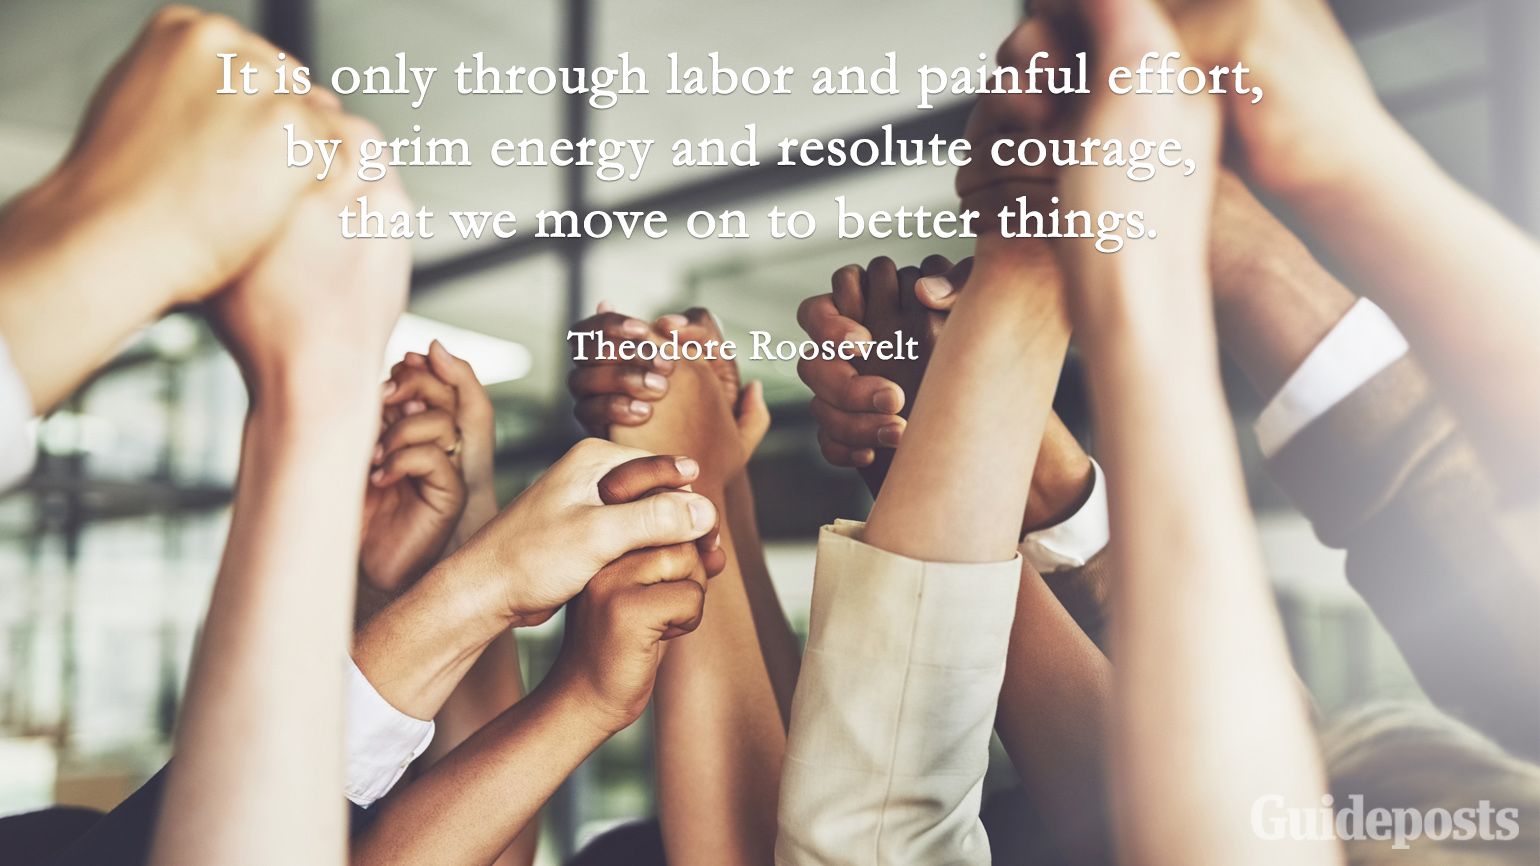 Inspiring Labor Day Quotes: "It is only through labor and painful effort, by grim energy and resolute courage, that we move on to better things." Theodore Roosevelt better living life advice